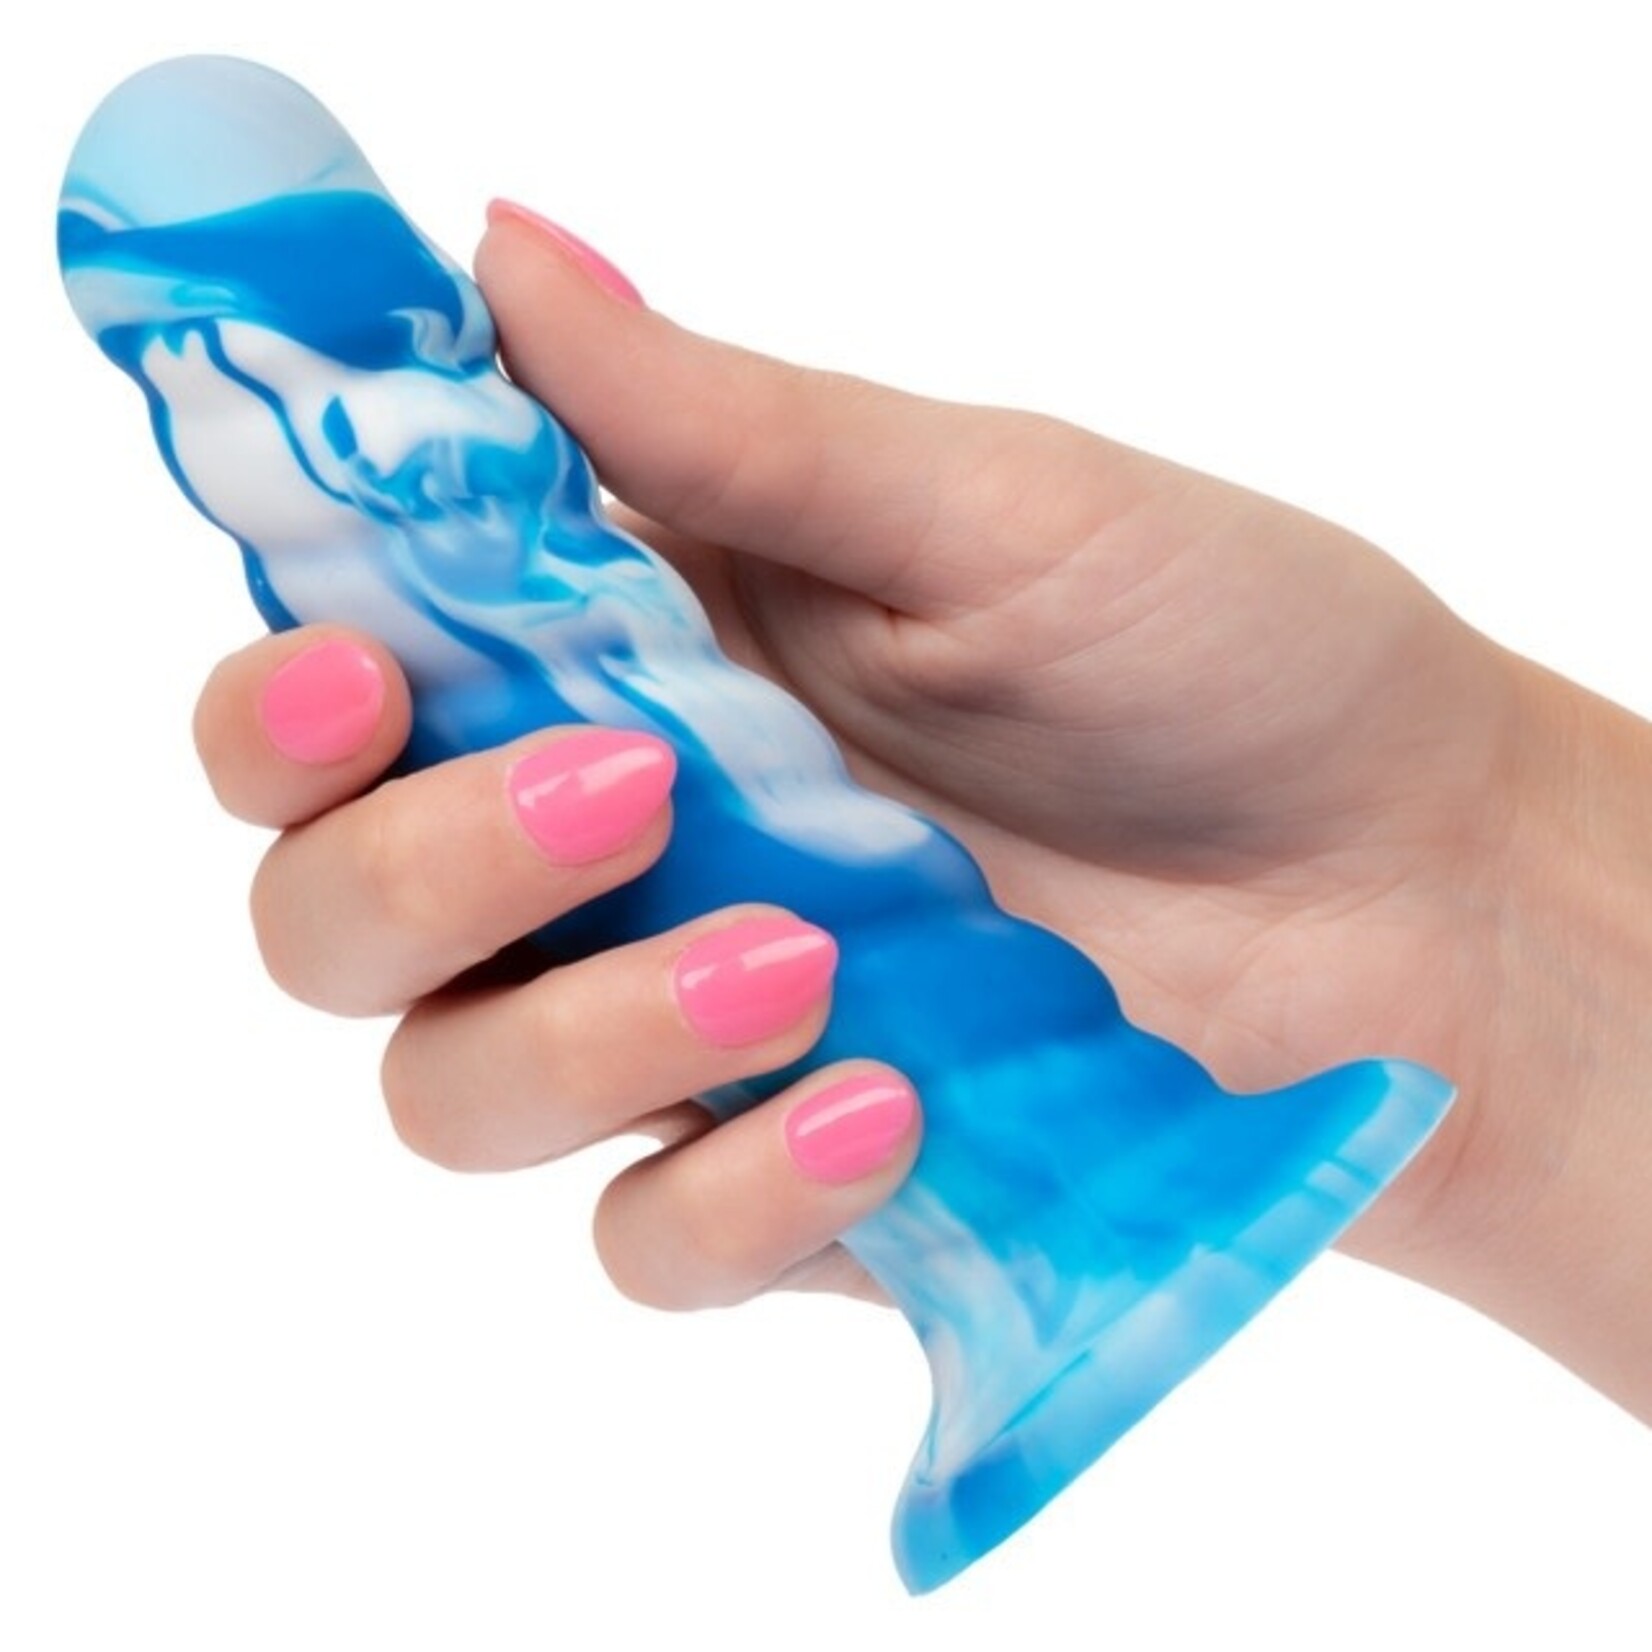 CALEXOTICS TWISTED LOVE TWISTED RIBBED PROBE - BLUE